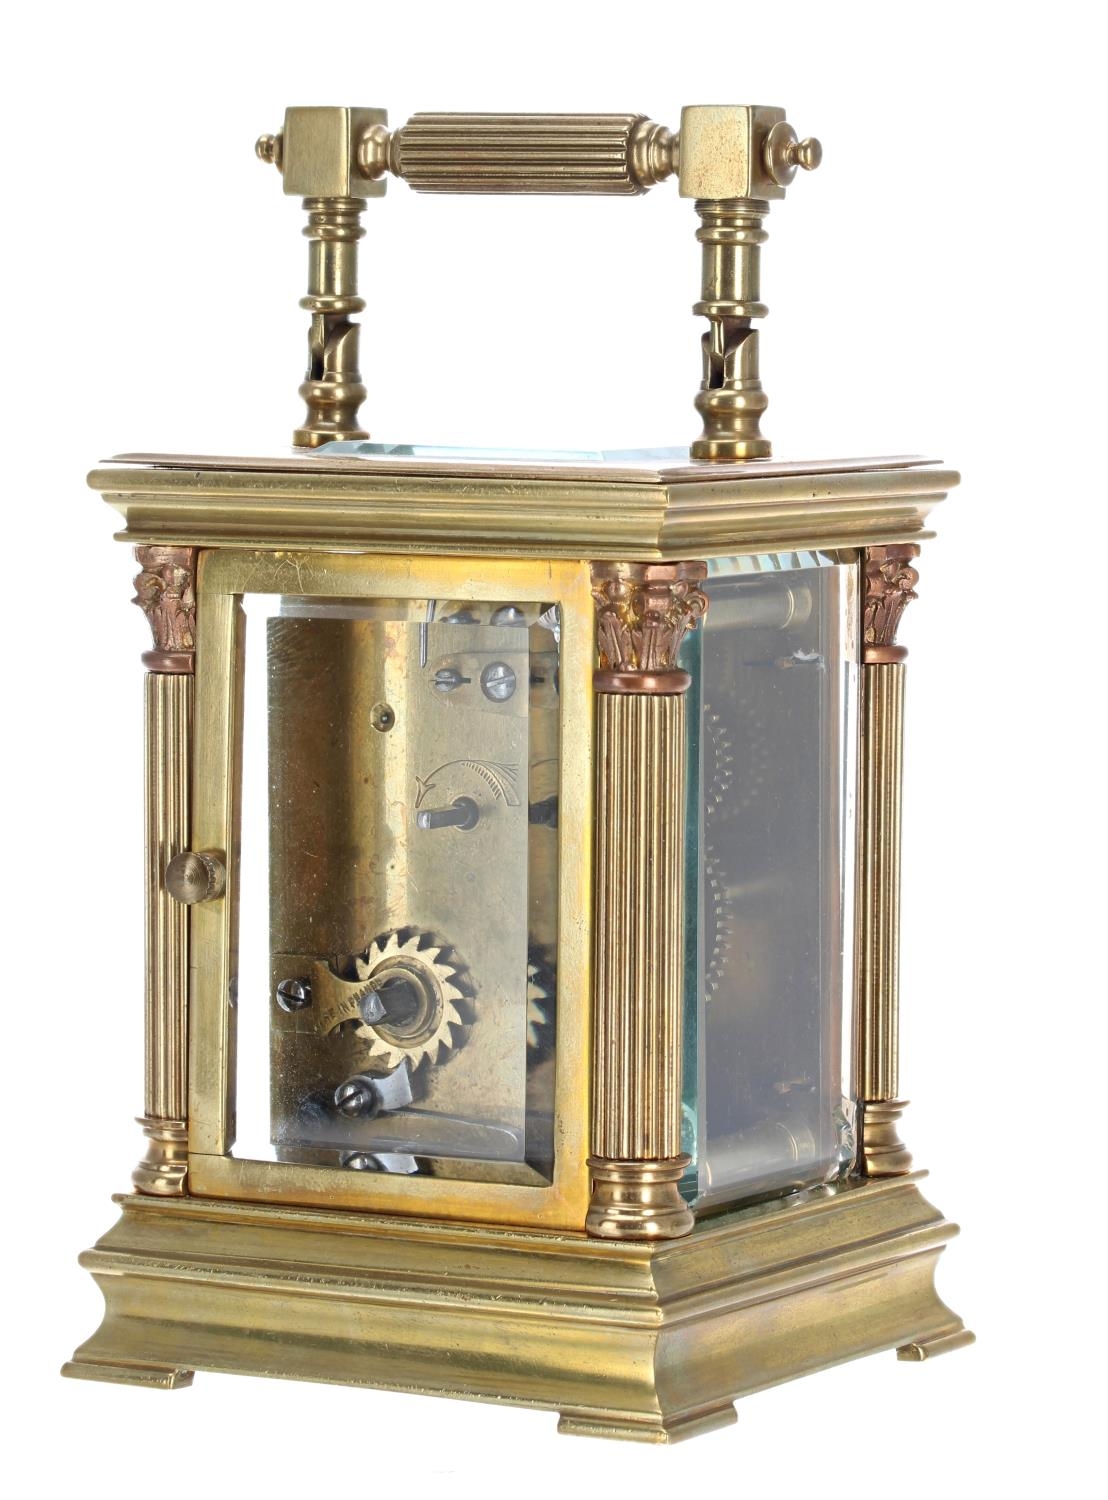 Mappin & Webb small carriage clock timepiece, the 1.5" white enamel dial signed Mappin & Webb Ltd, - Image 5 of 6